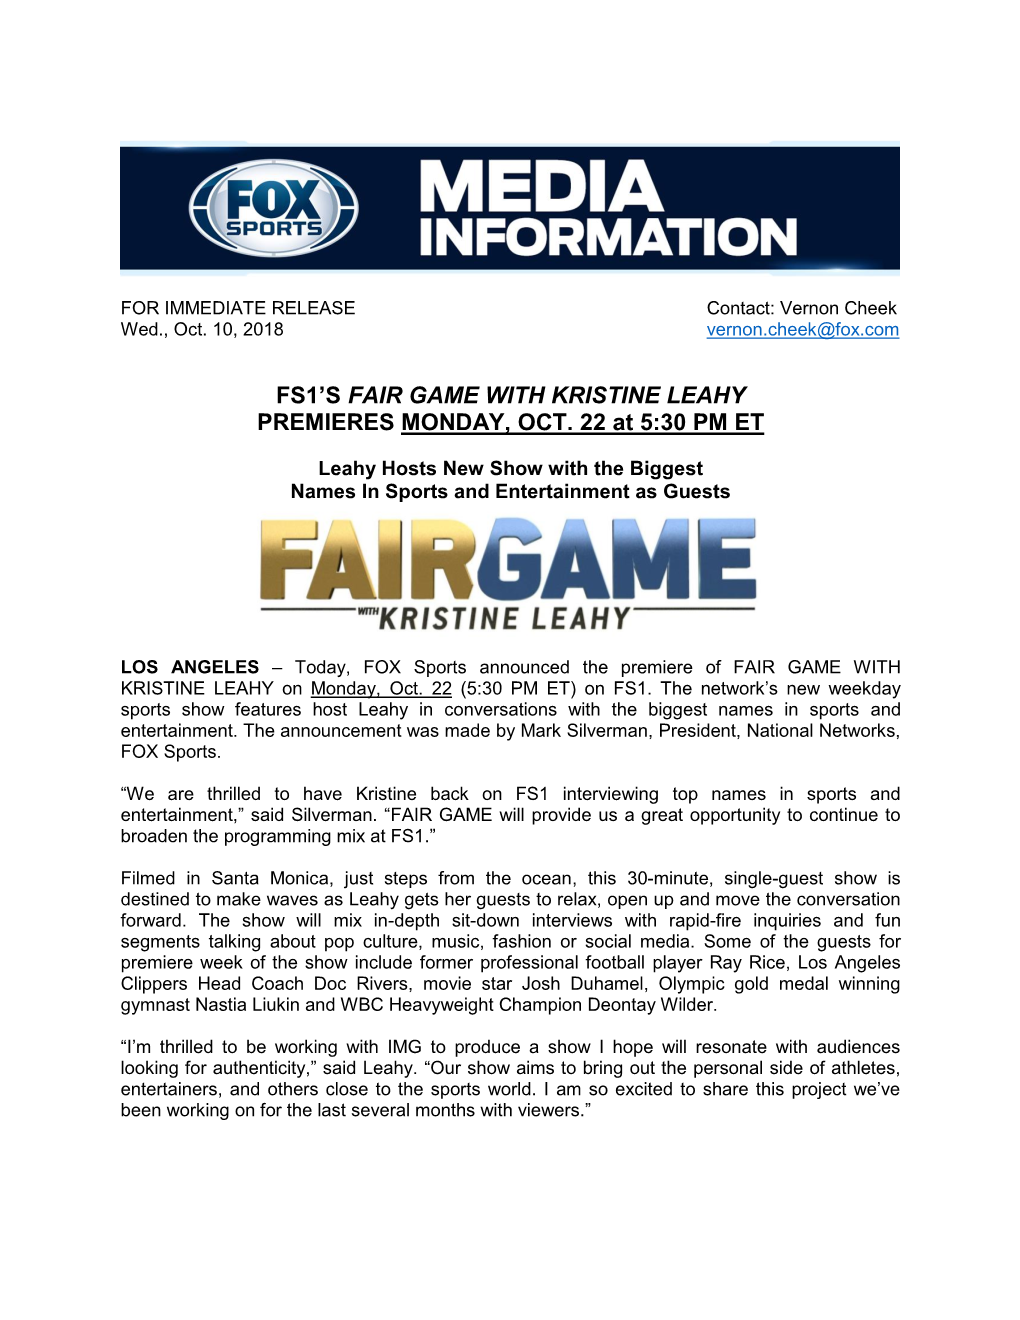 FS1's FAIR GAME with KRISTINE LEAHY Premieres Monday, Oct. 22 at 5:30 PM ET